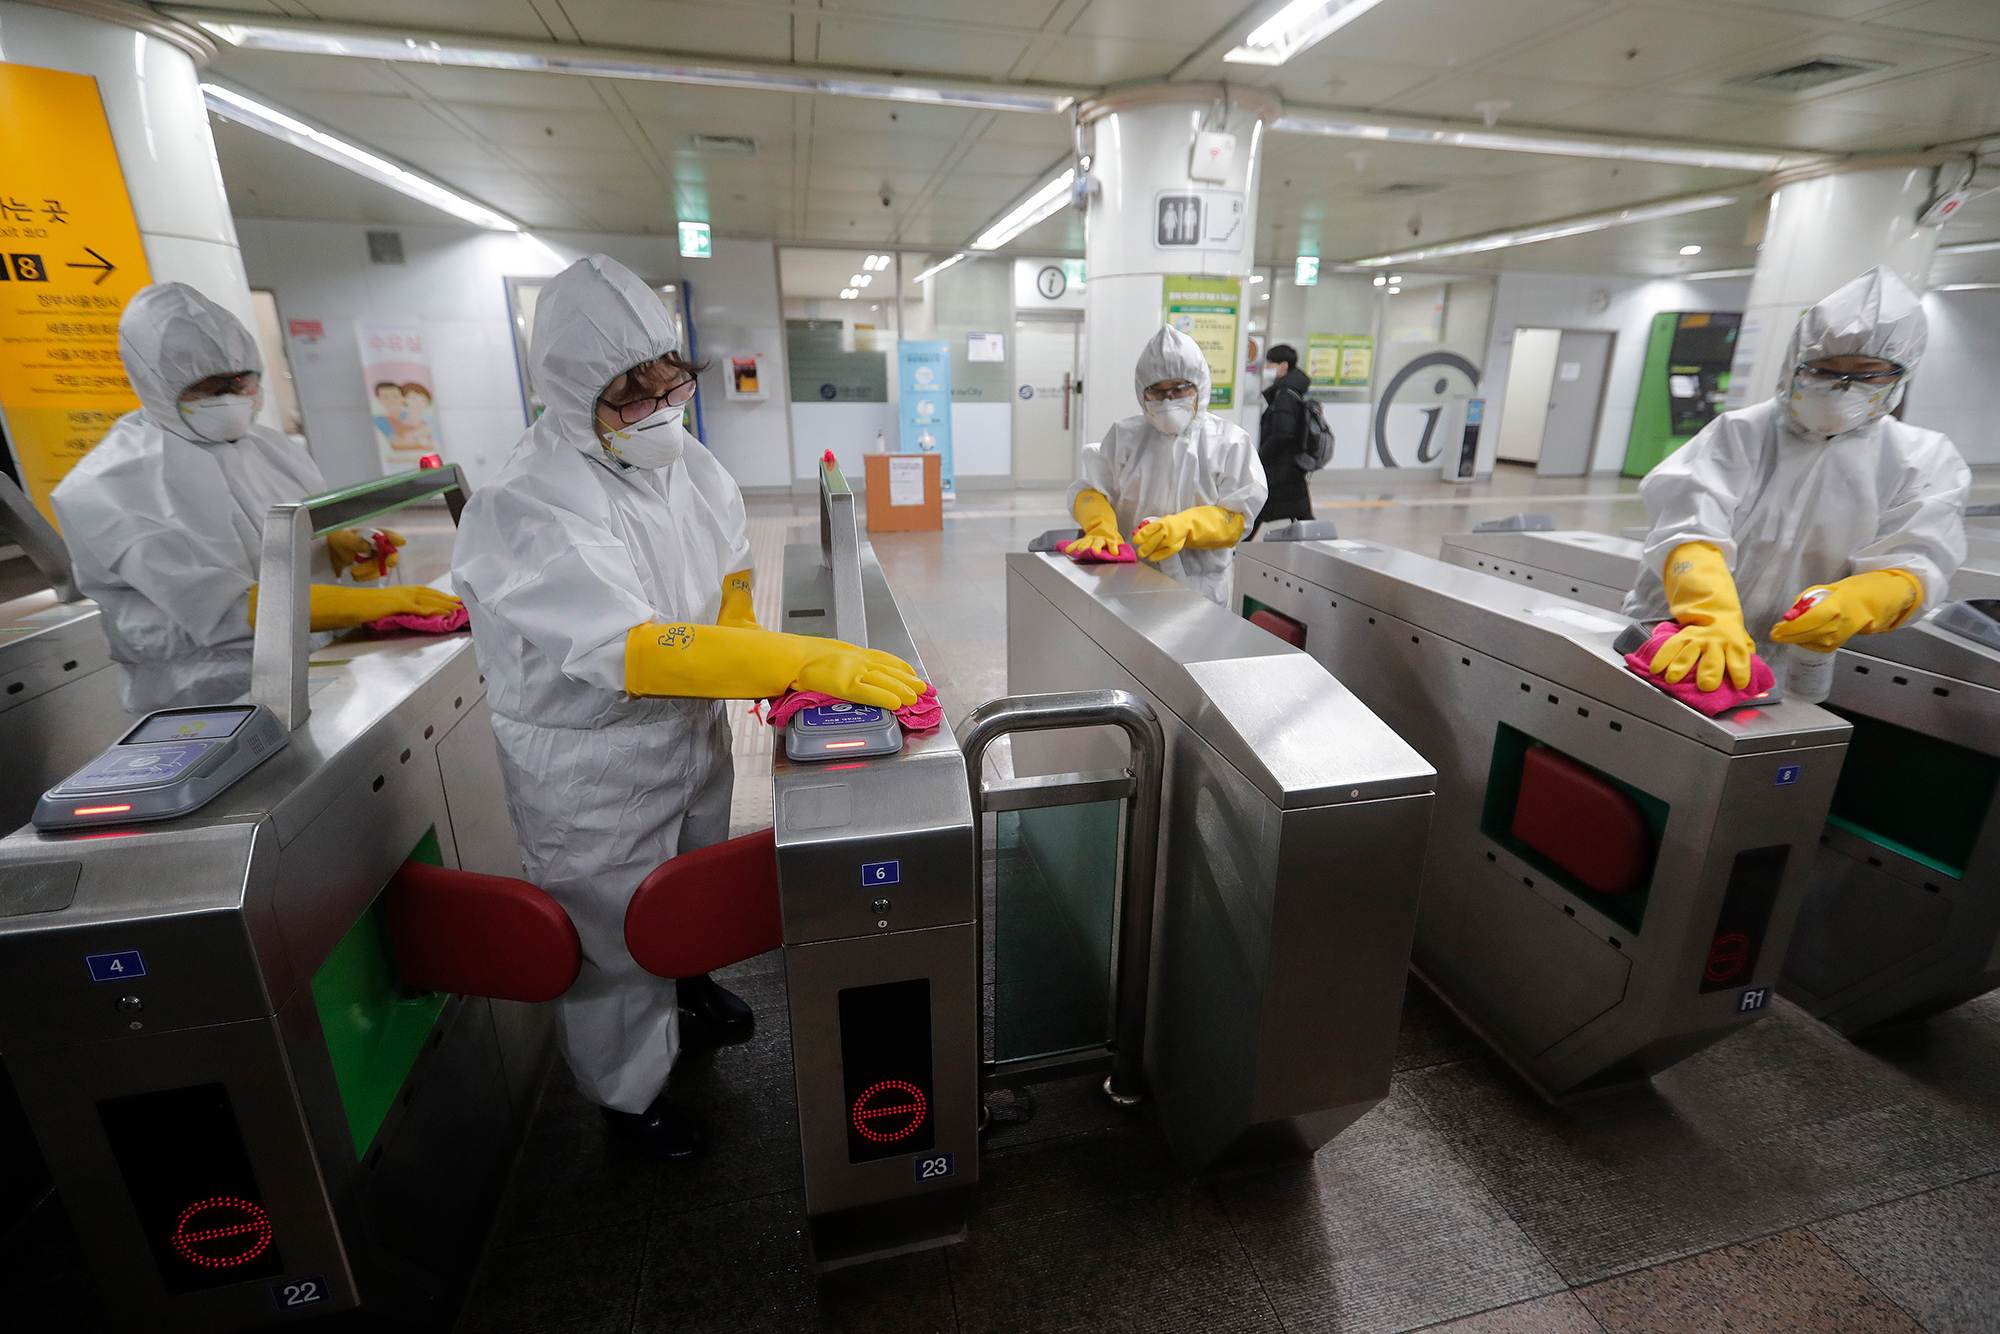 Workers wearing protective gear disinfect ticket gates as a precaution against the coronavirus at a subway station in Seoul, South Korea, Friday, February 28.